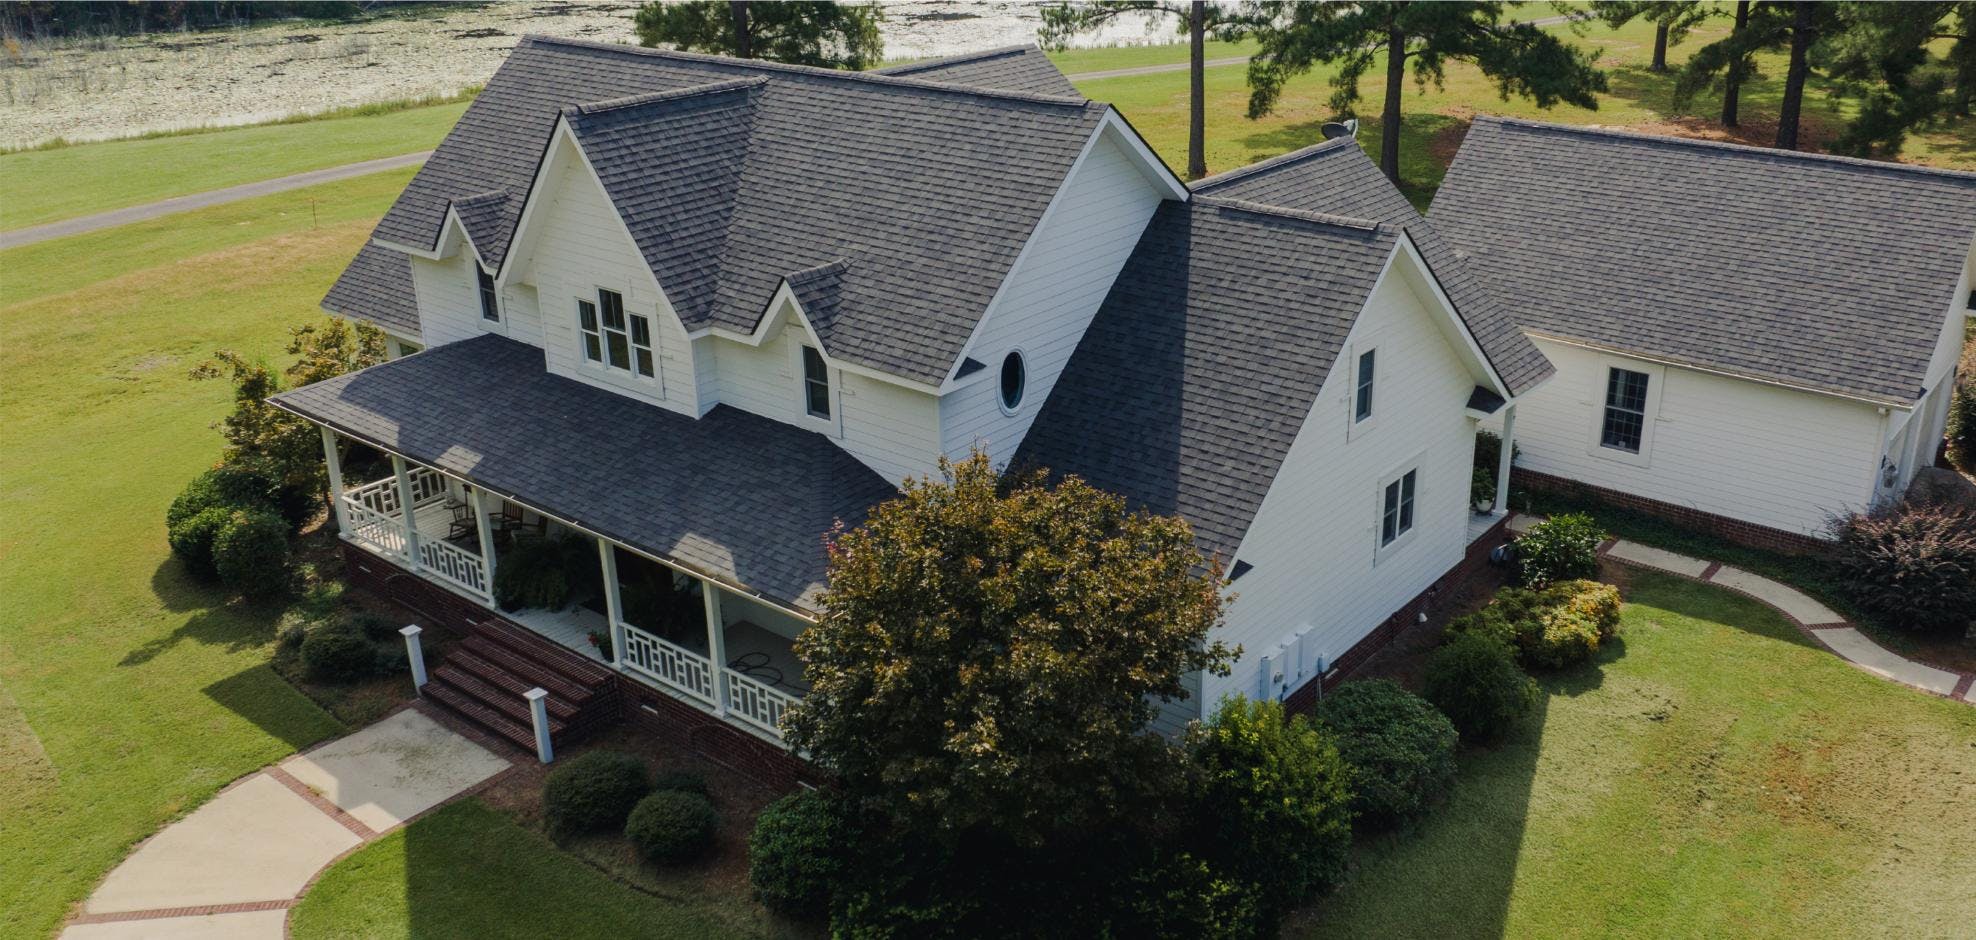 Residential Roofing Experts | Residential Roof Repair | Residential Roof Replacement | Residential Roof Maintenance Program